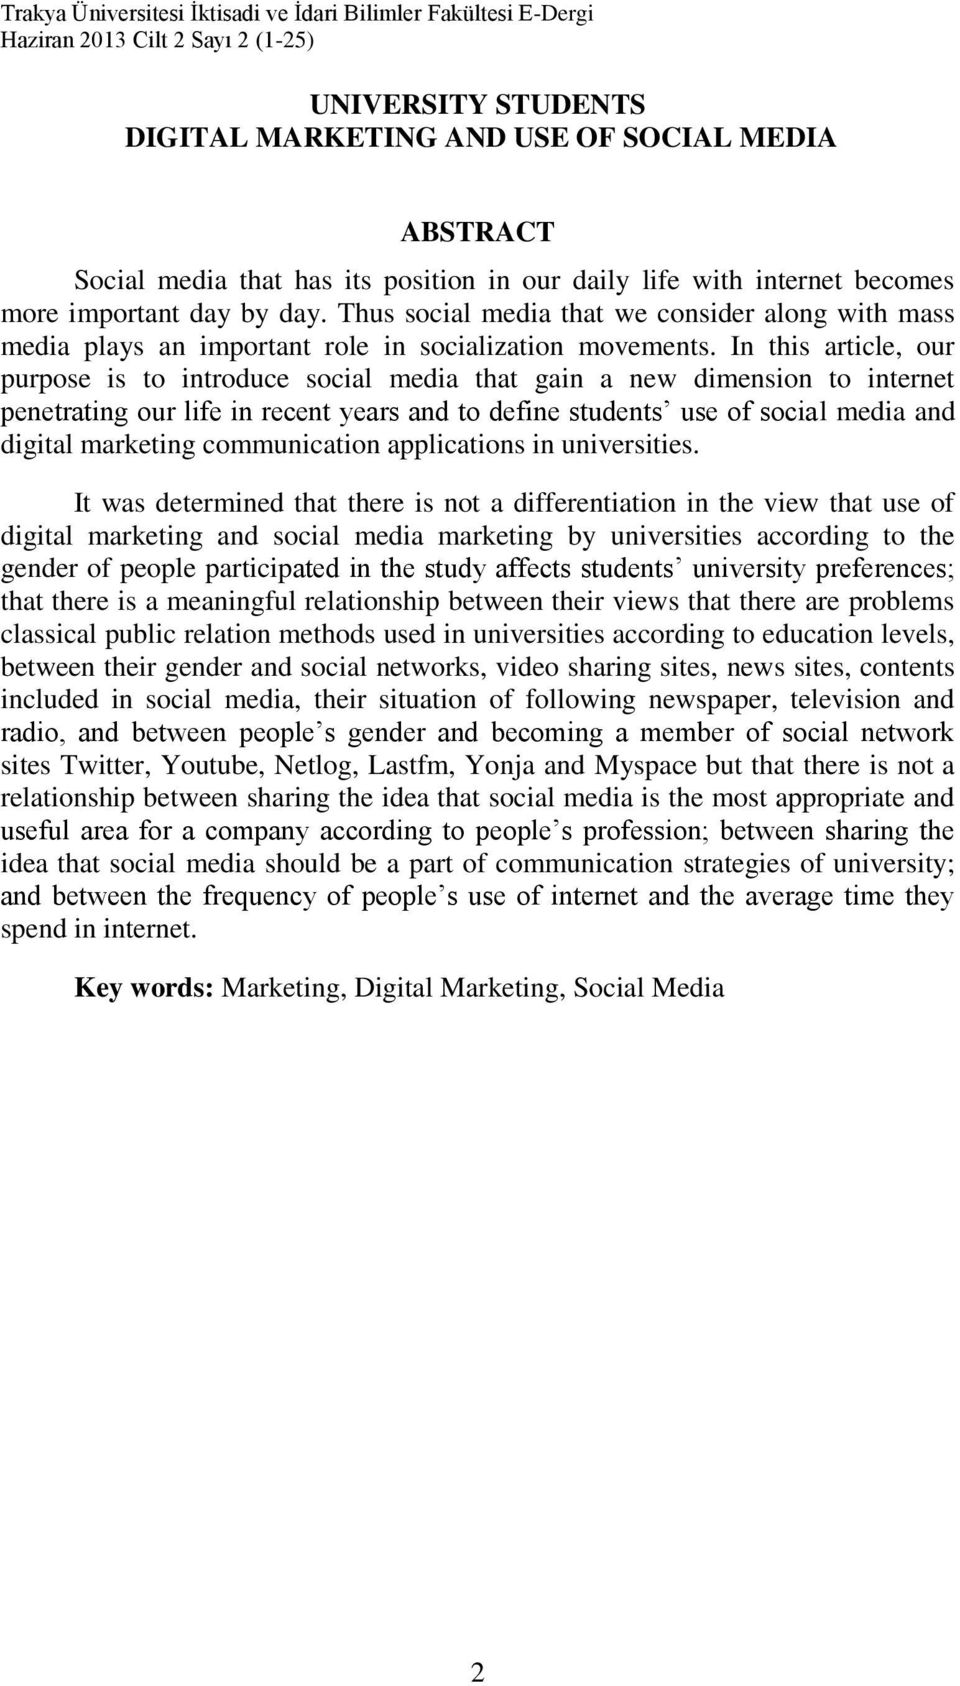 In this article, our purpose is to introduce social media that gain a new dimension to internet penetrating our life in recent years and to define students use of social media and digital marketing